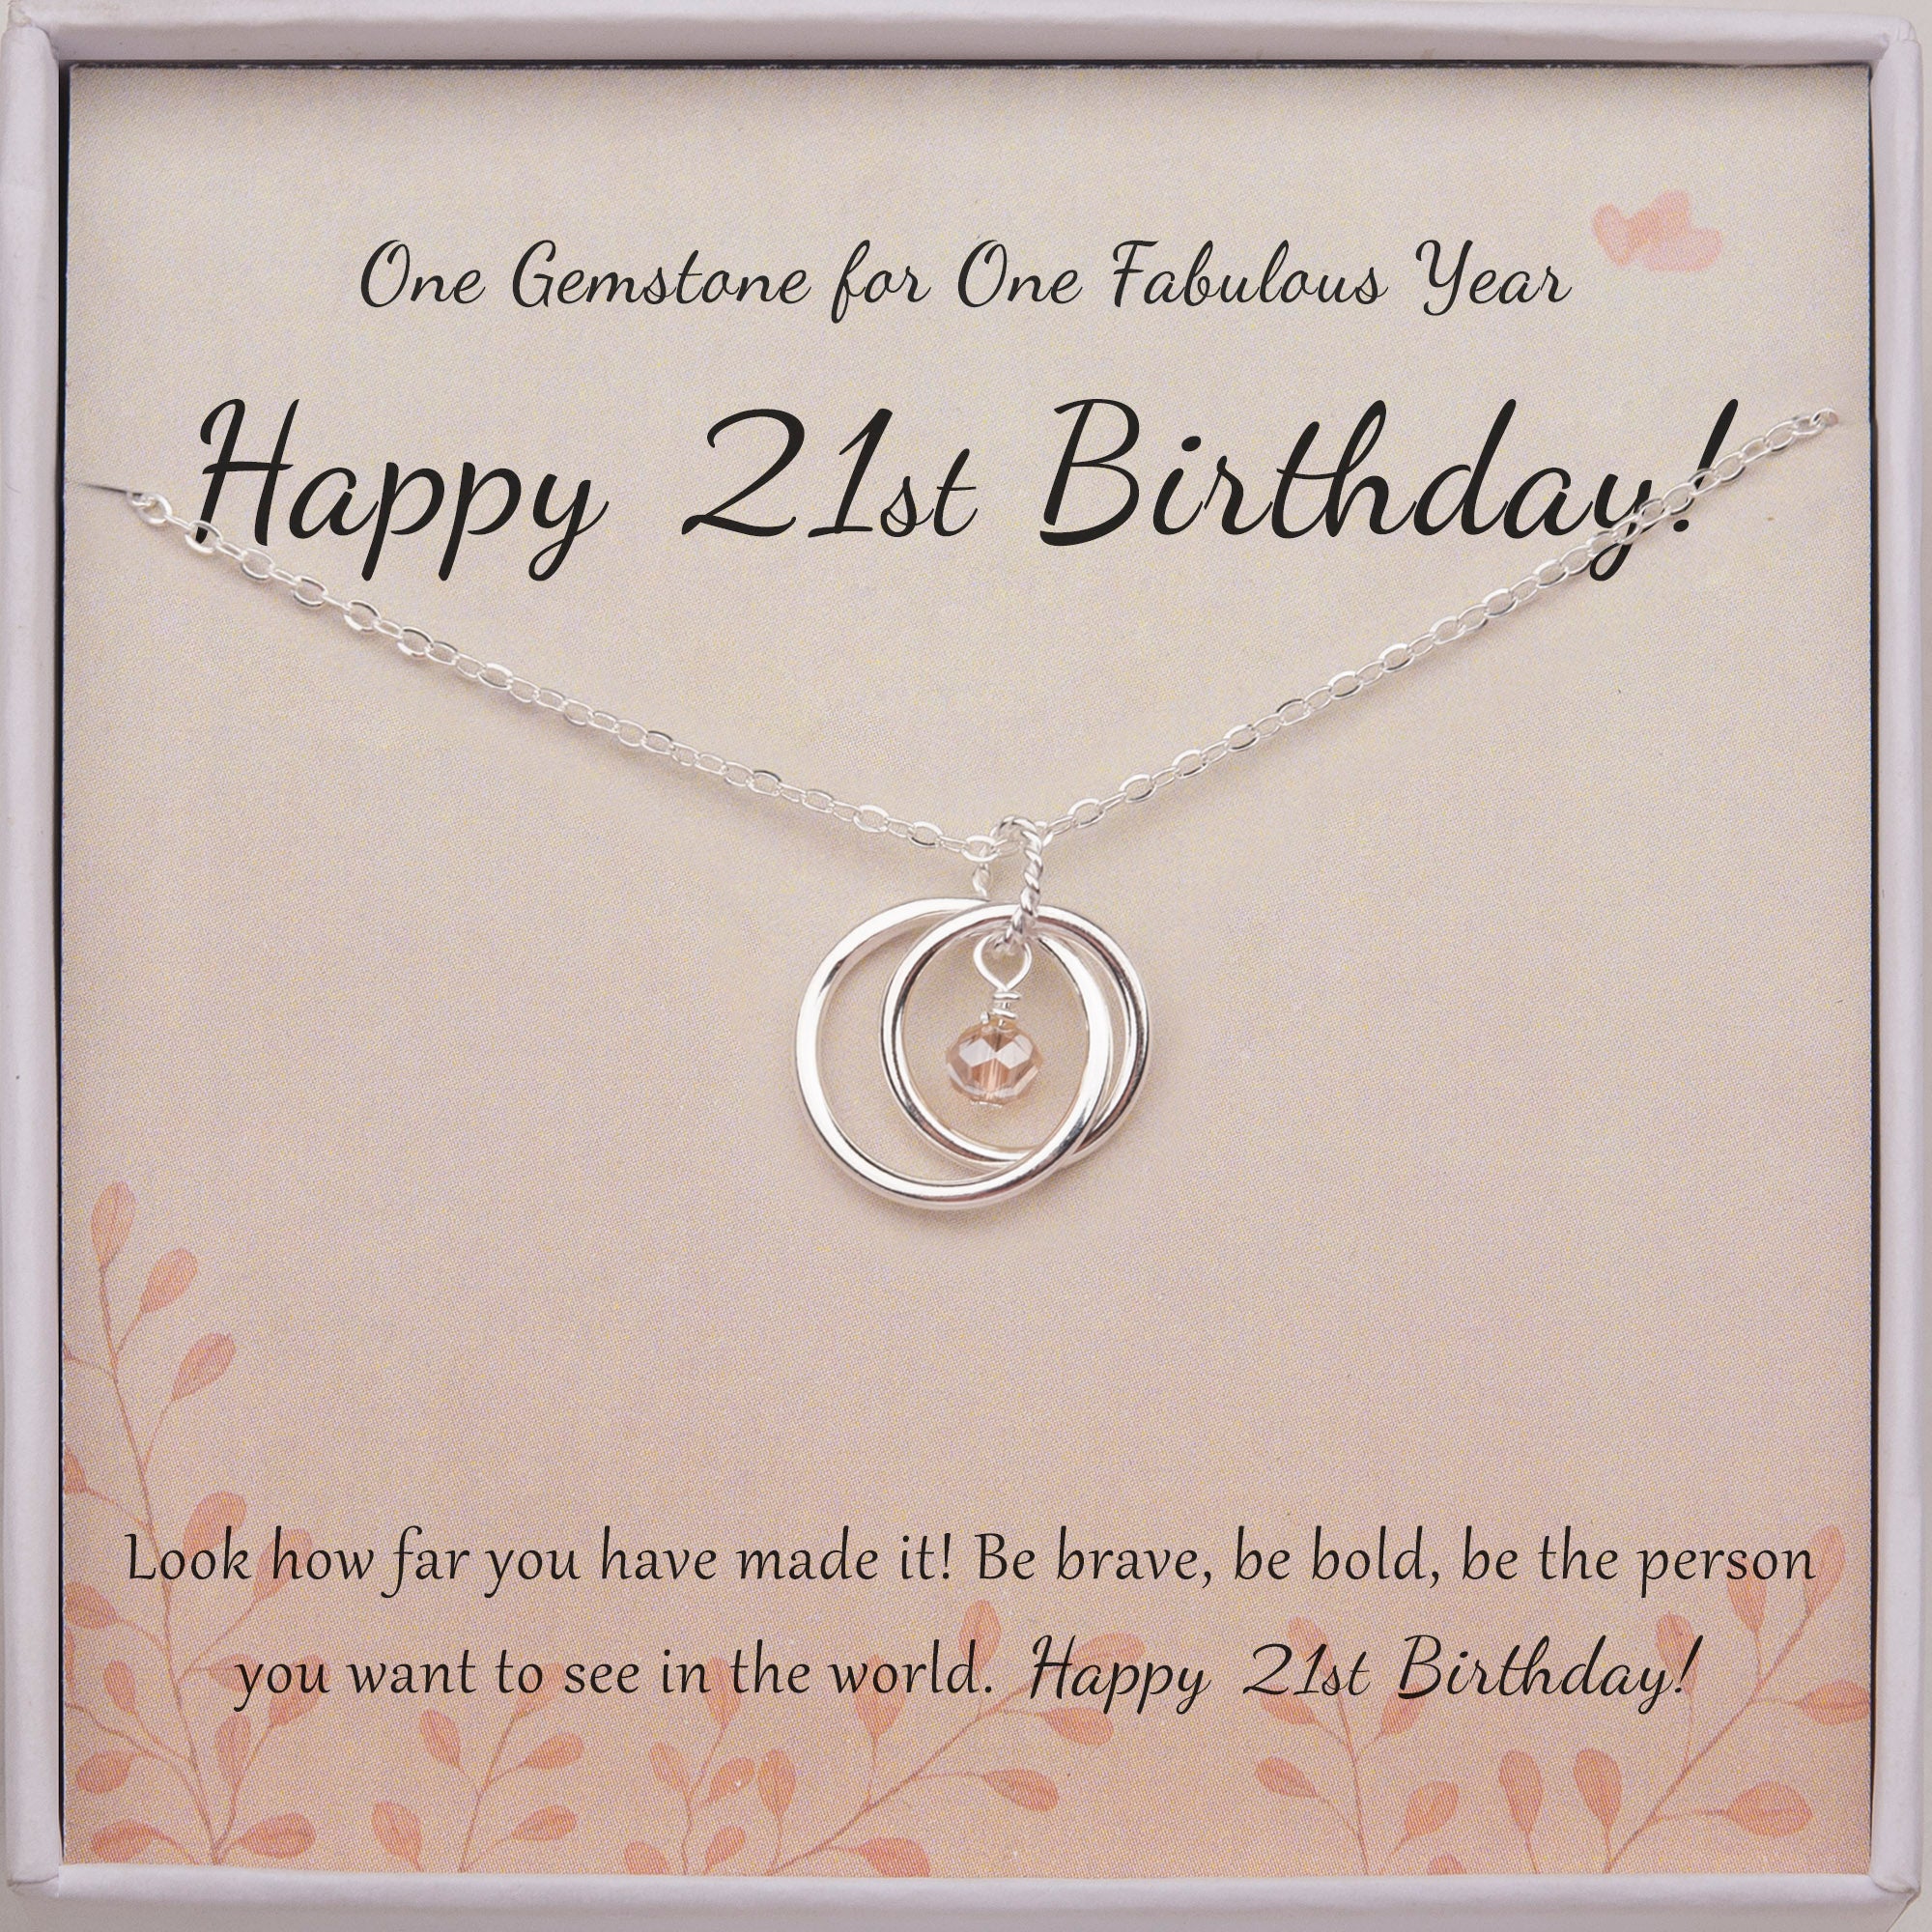 Anavia Happy 21st Birthday Gifts Stainless Steel Fashion Necklace